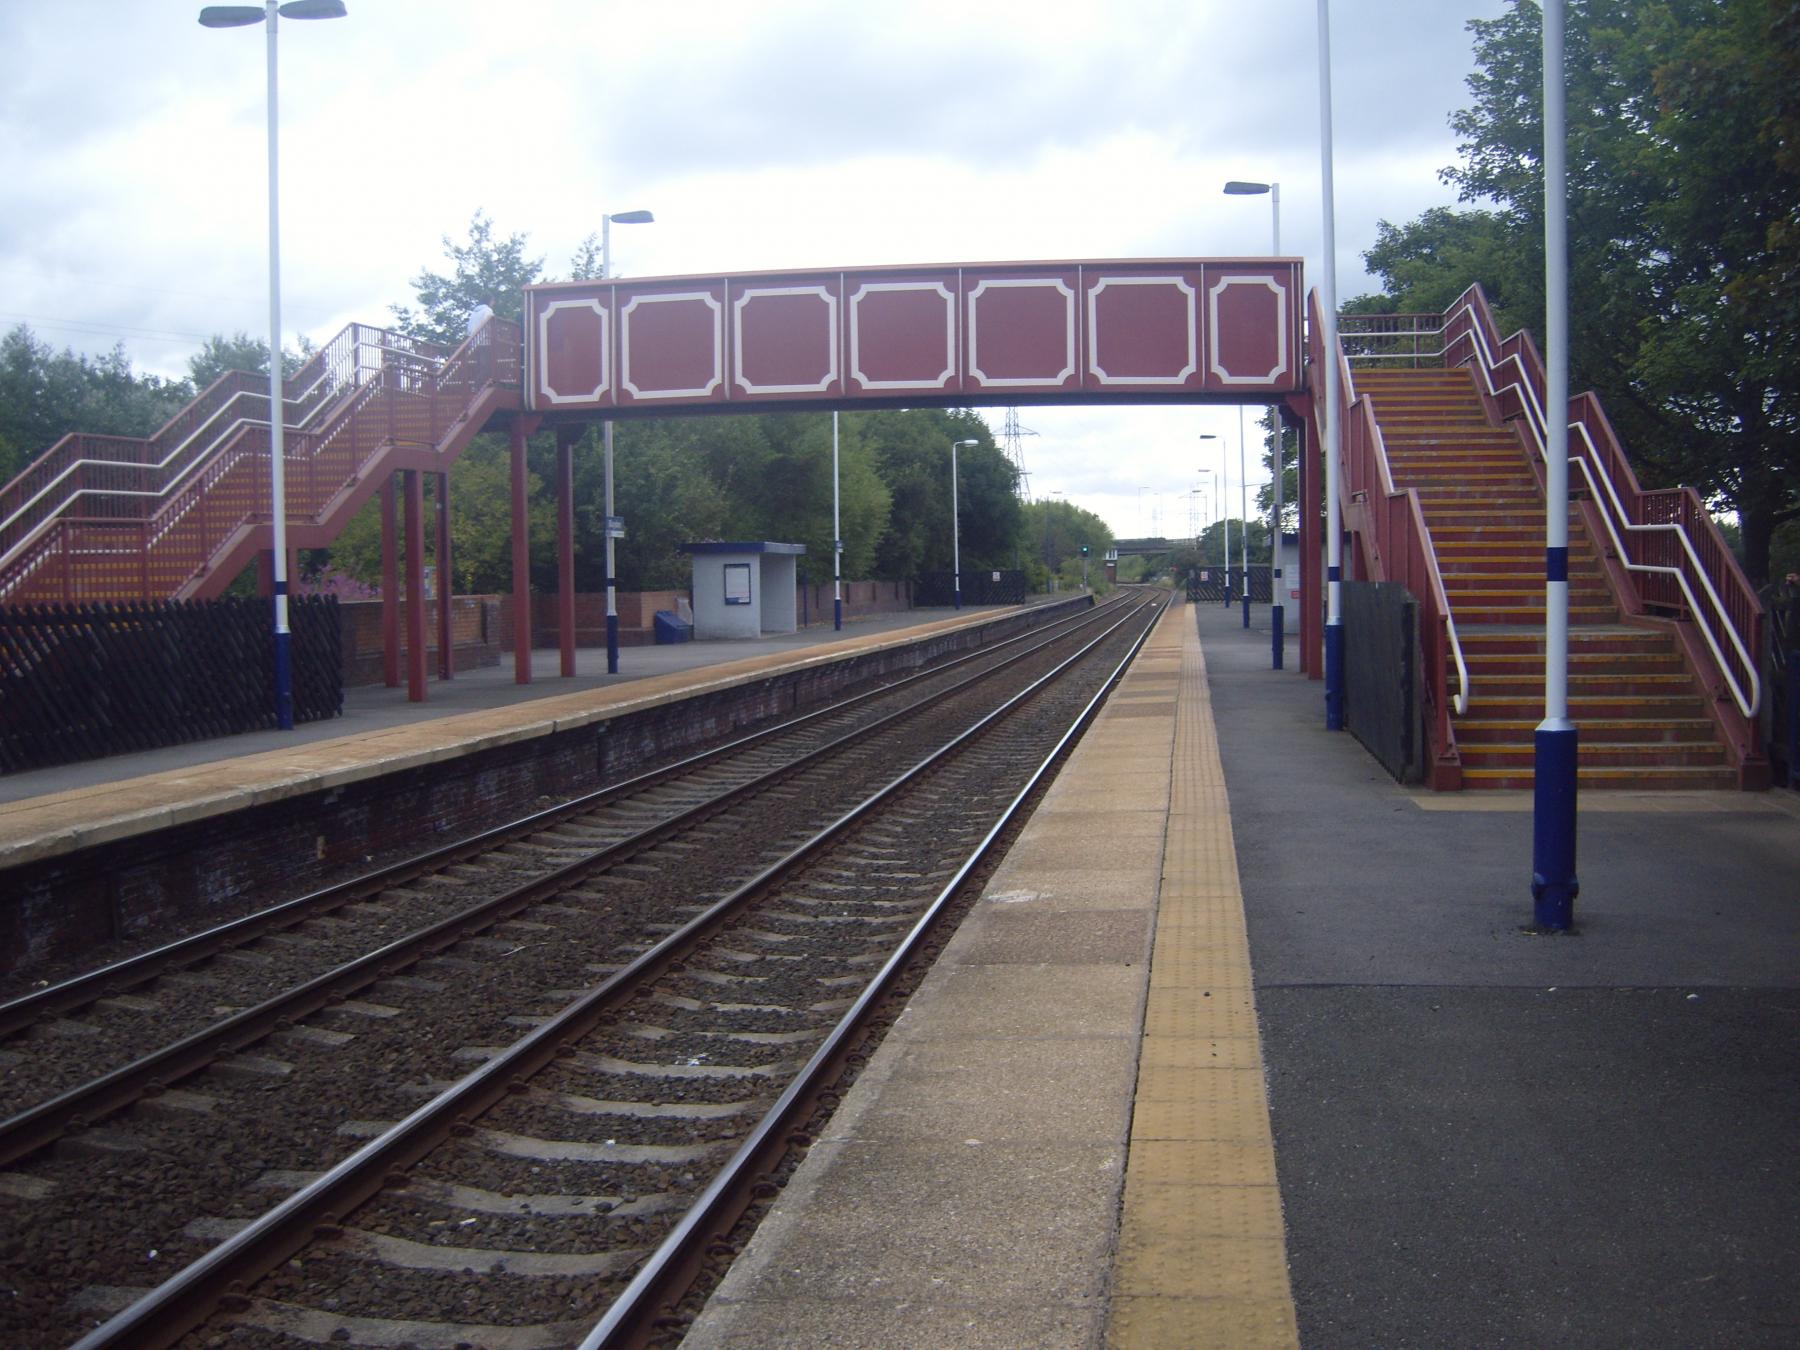 Blaydon Station, taken from the west (Carlisle) end.